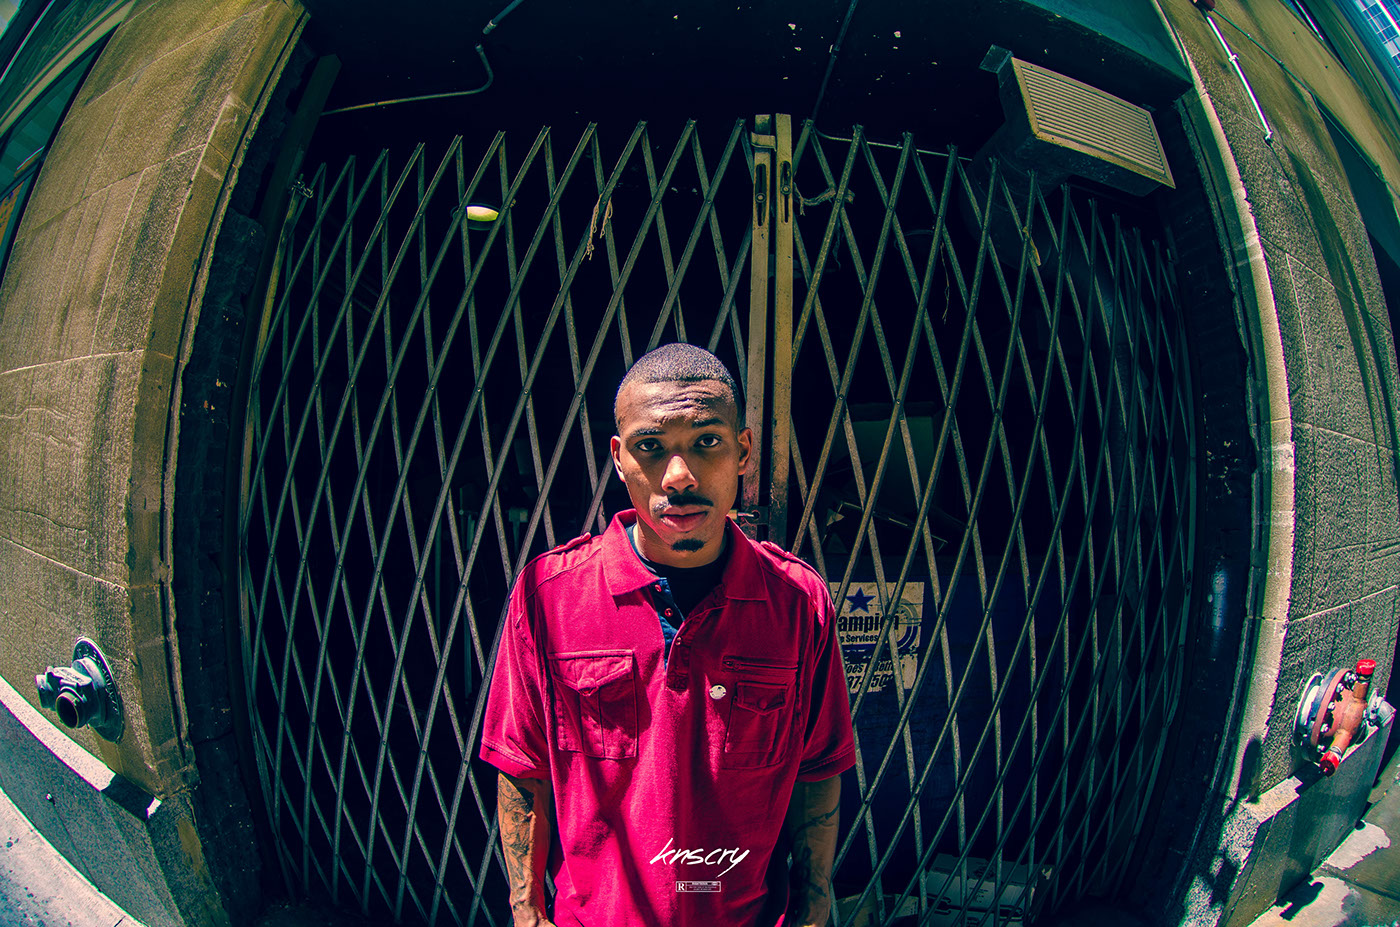 Flint Michigan rapper Knscry dope new pictures street photography